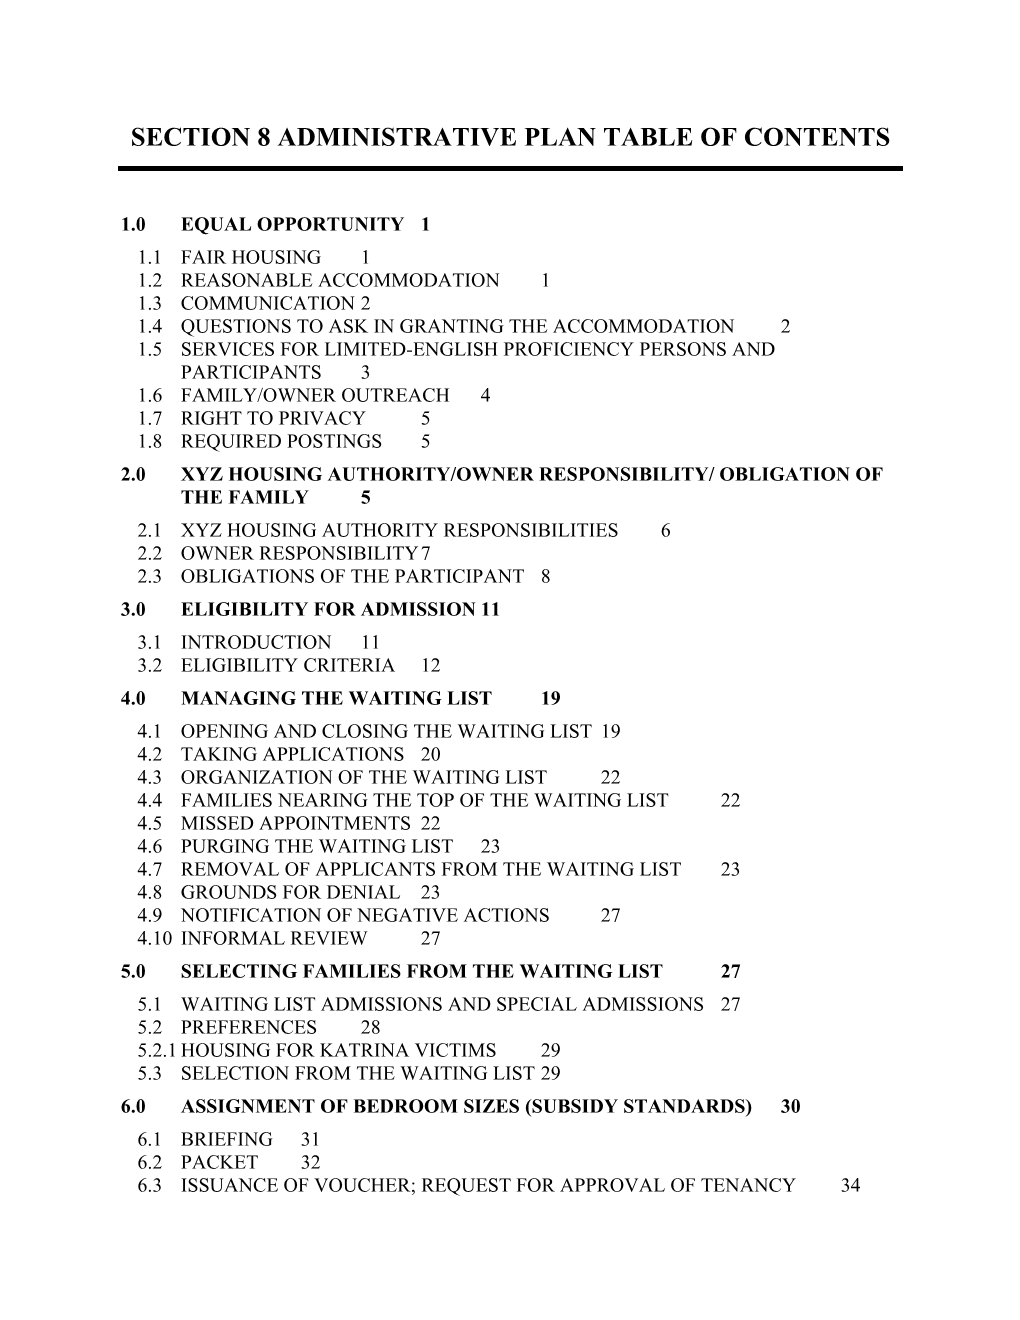 Section 8 Administrative Plan Table of Contents